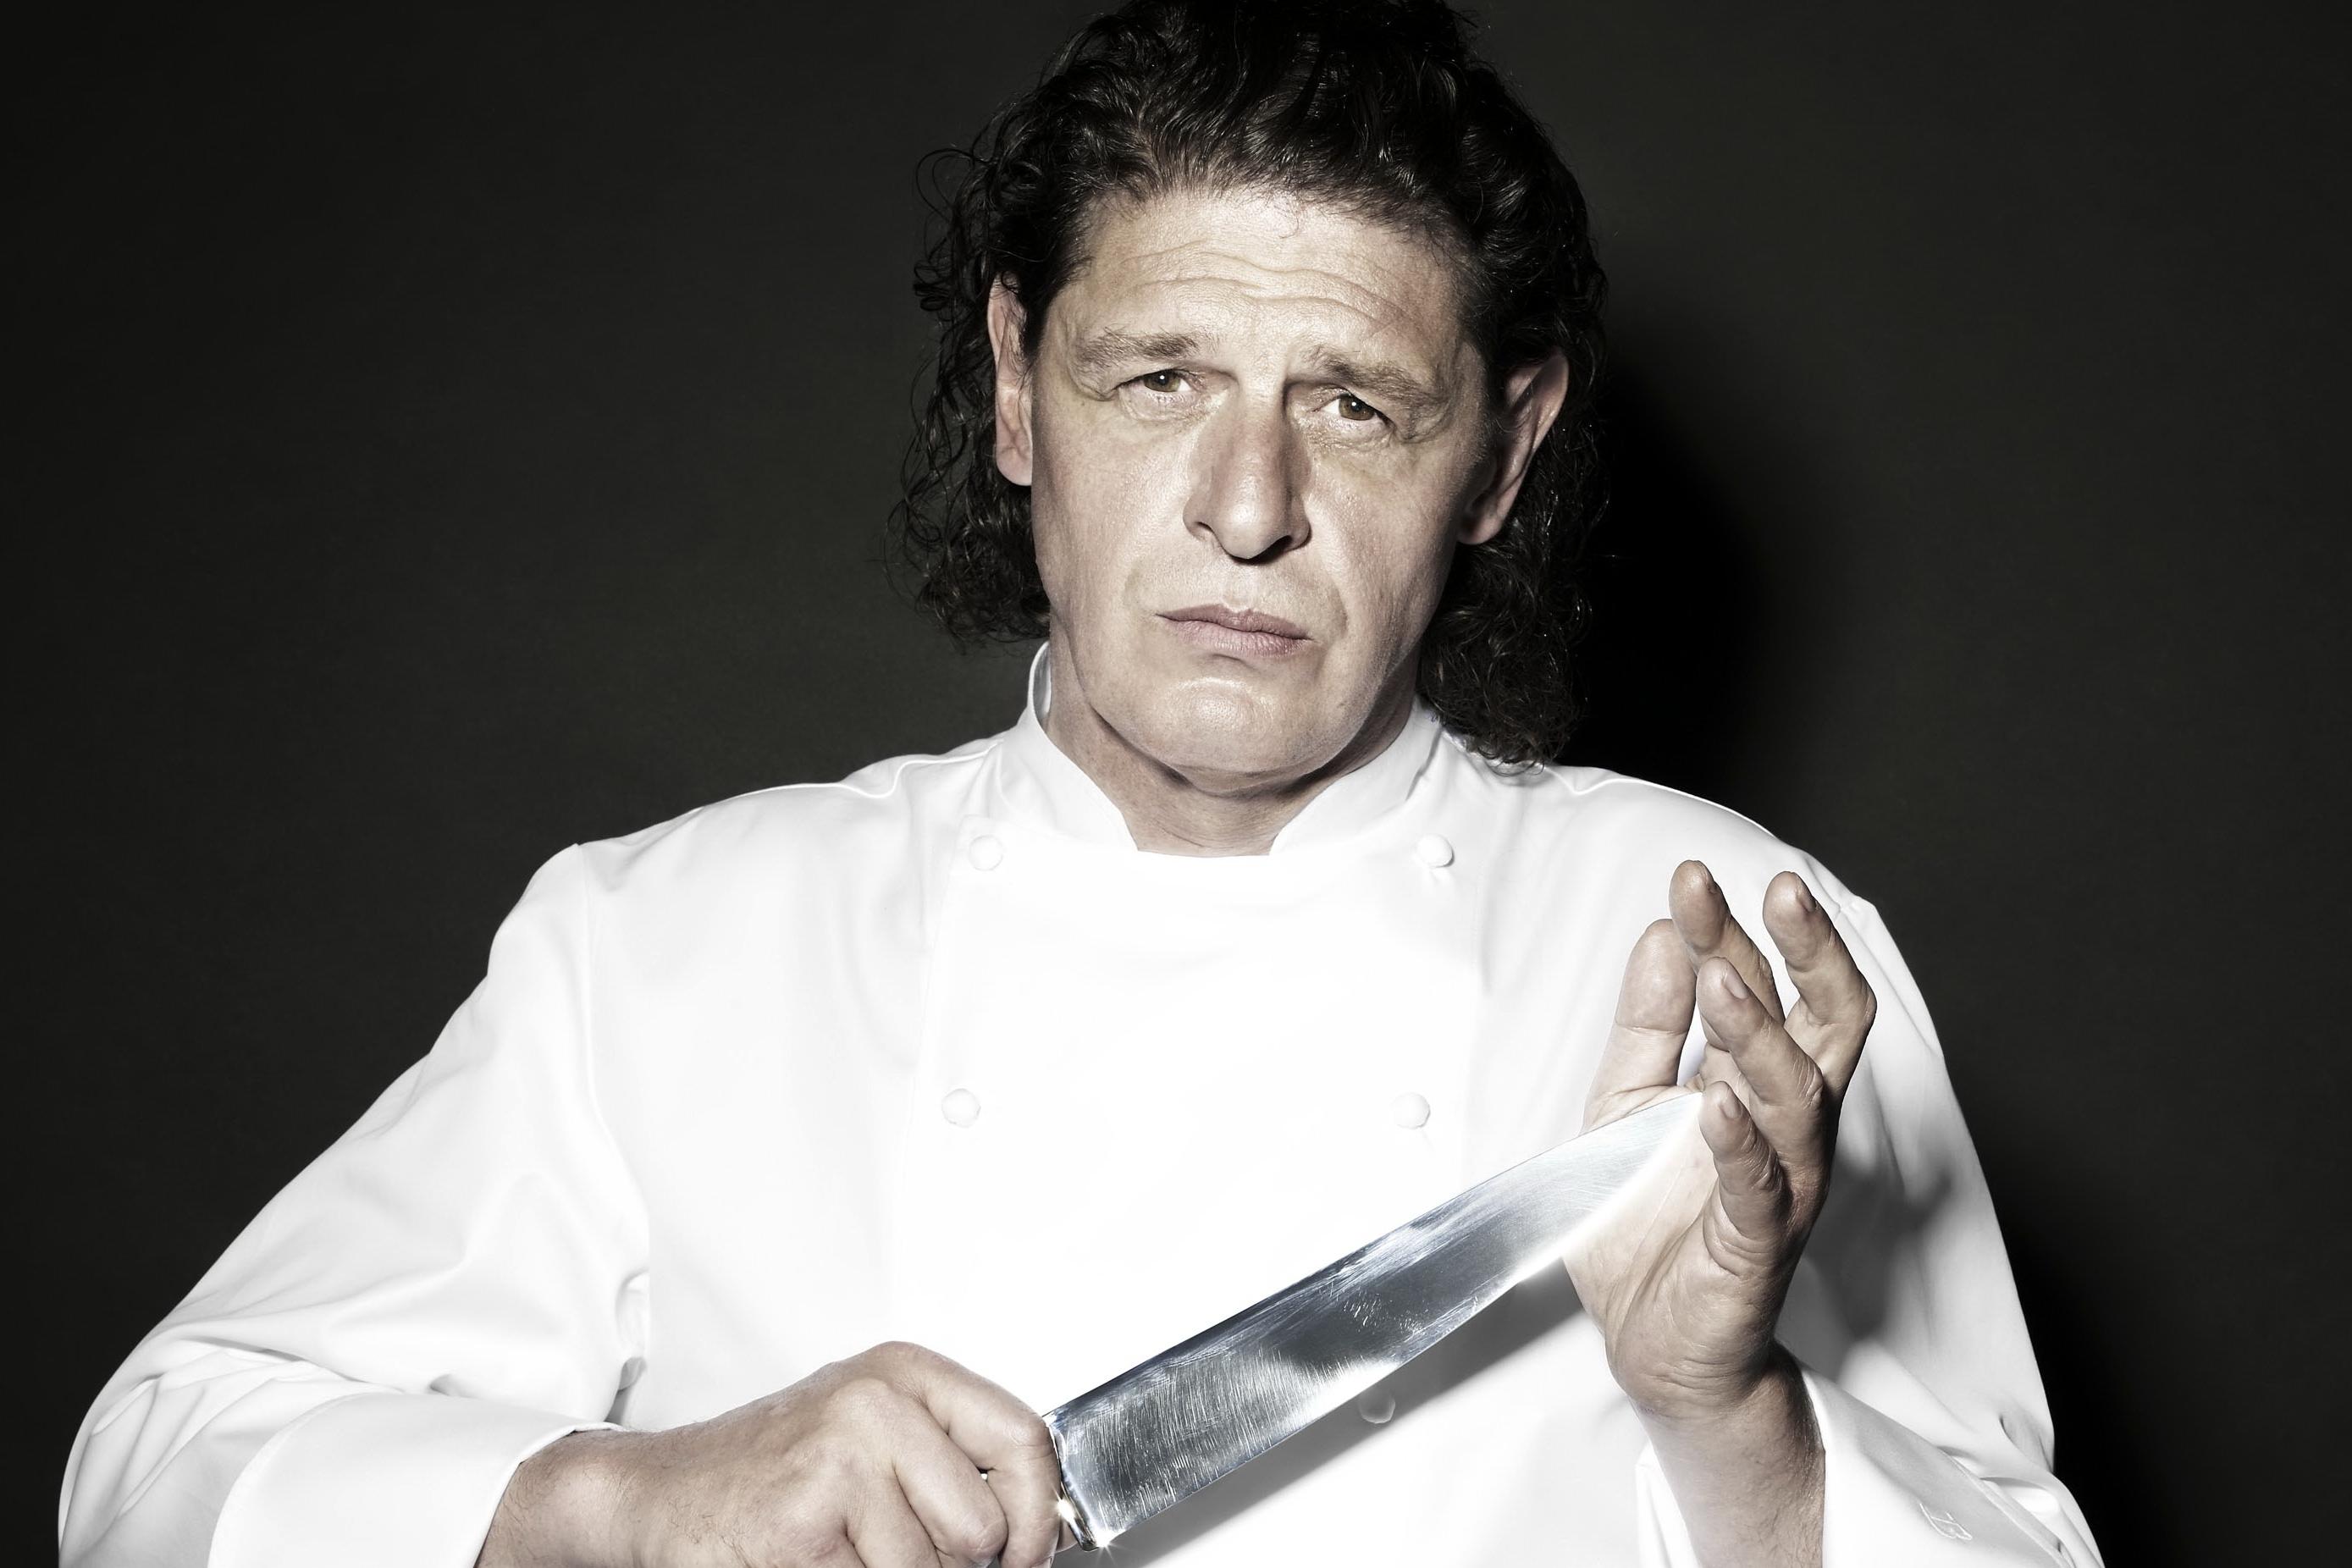 Marco Pierre White wearing a white chef uniform while holding a knife